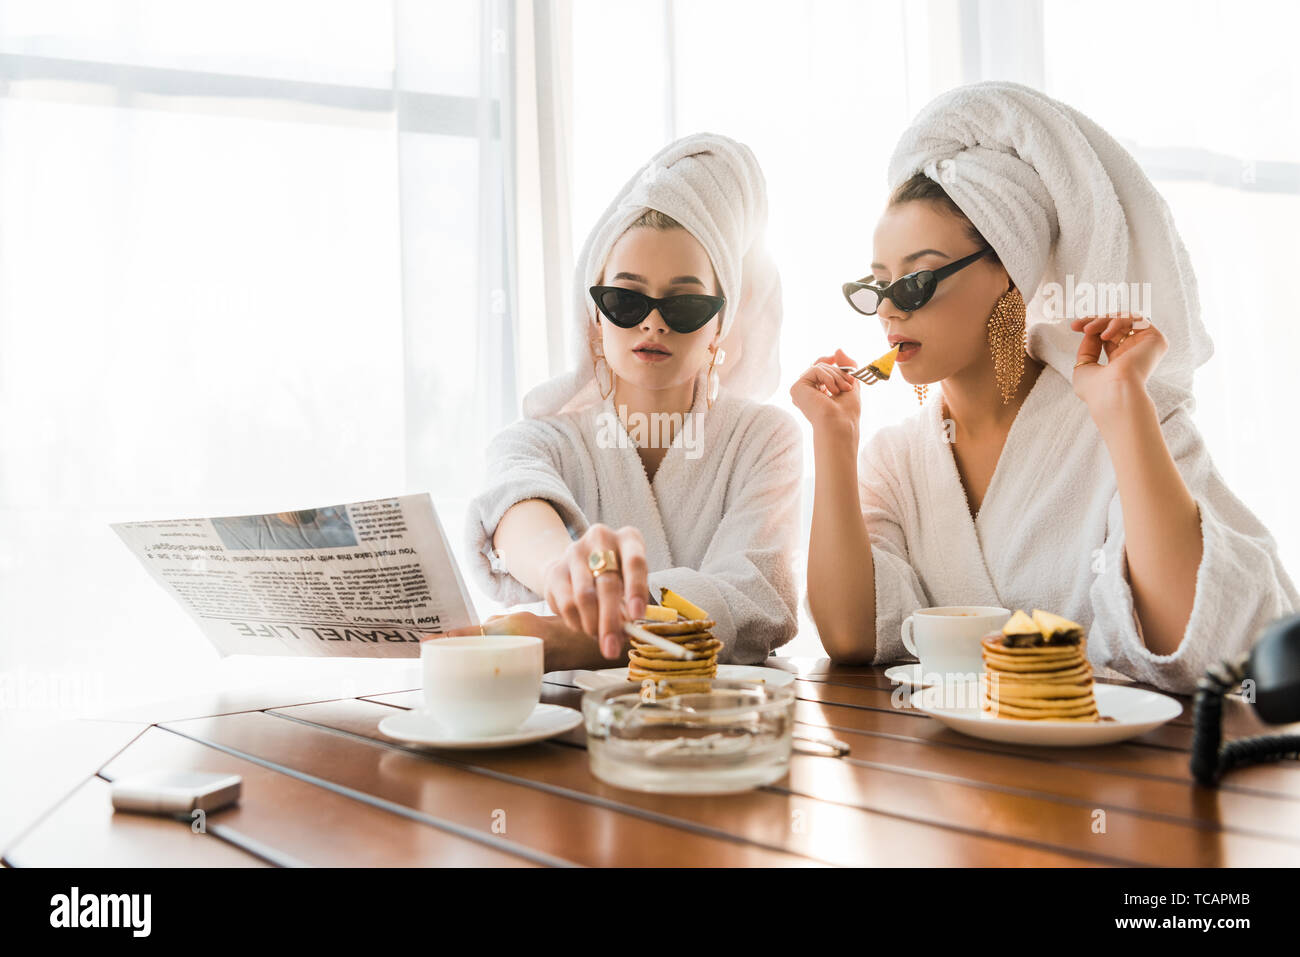 stylish women in bathrobes, sunglasses and jewelry with towels on heads smoking cigarette and reading newspaper while eating pancakes Stock Photo